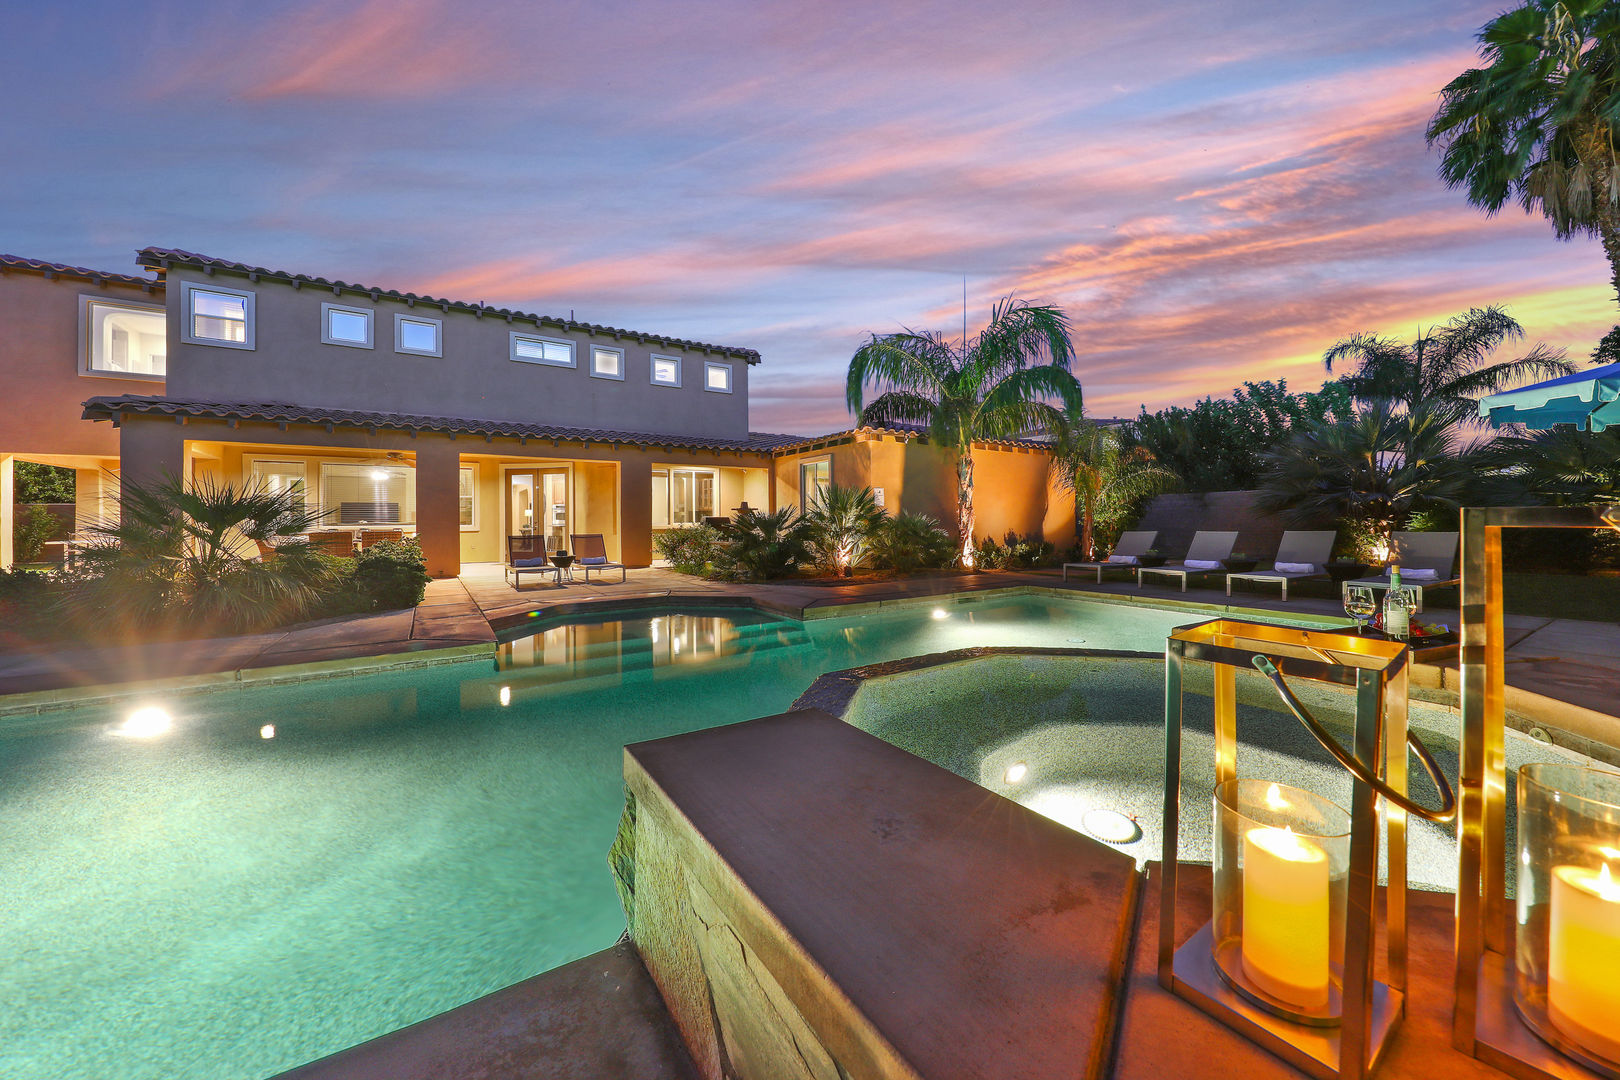 Spacious backyard with chaise lounge seating, oversized pool, spa, al fresco dining and basketball court